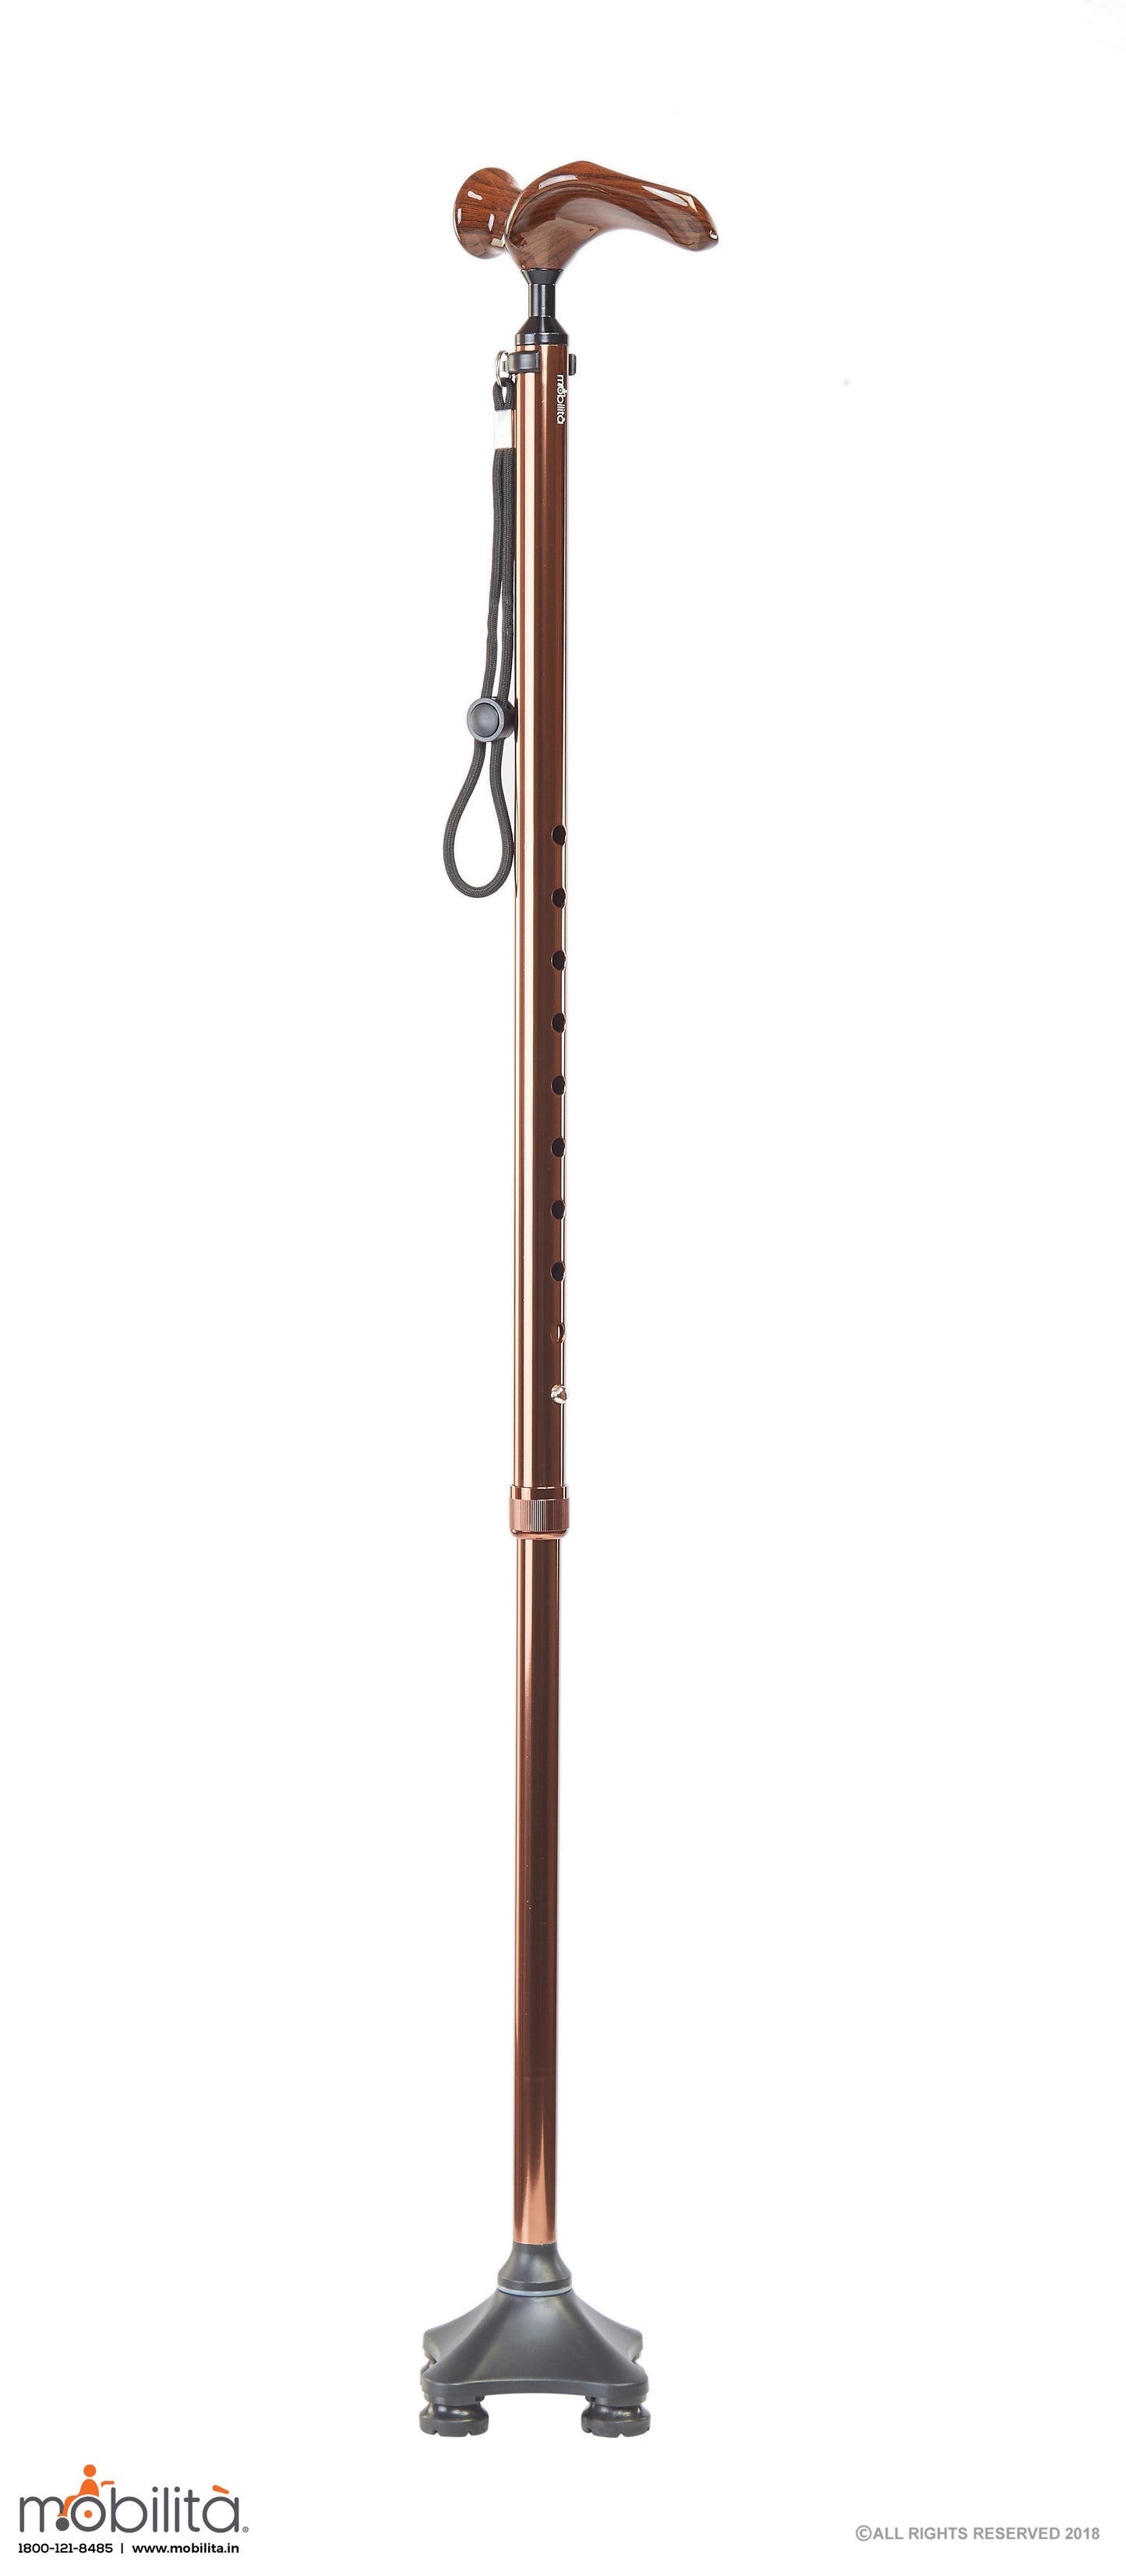 M 713 - Walking Cane - Square Foot - Palm Shaped Handle - Champagne Brown